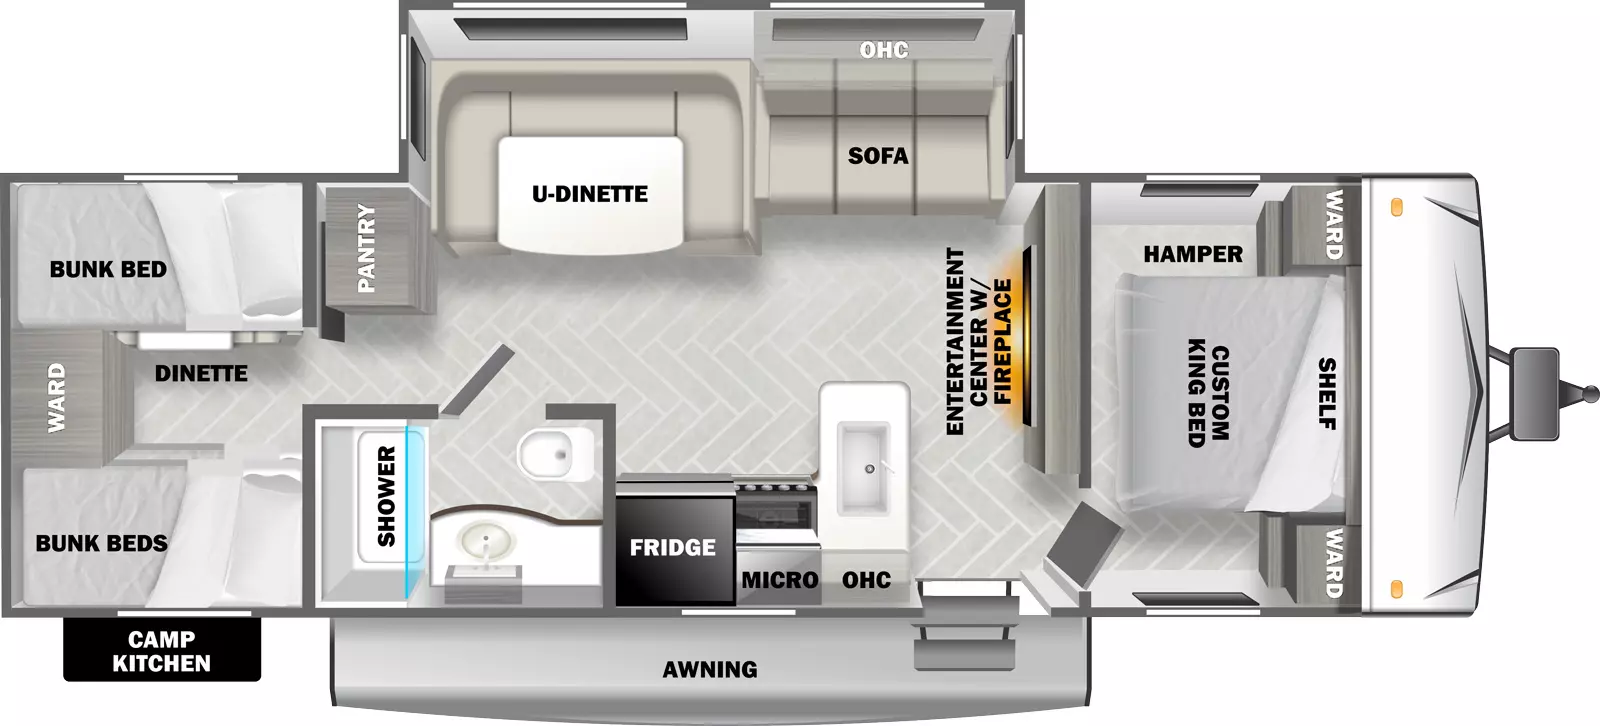 The T3050 has one slideout and one entry. Exterior features camp kitchen, and awning. Interior layout front to back: custom king bed with shelf above, wardrobes on each side, and off-door side hamper; entertainment center with fireplace below along inner wall; off-door side slideout with sofa, overhead cabinet, and u-dinette, and a pantry; door side entry, peninsula kitchen counter with sink wraps to door side with overhead cabinet, microwave, cooktop and refrigerator; door side side-aisle full bathroom; rear bunk room with door side bunk beds, off-door side dinette below with bunk above, and wardrobe one the rear wall between them.